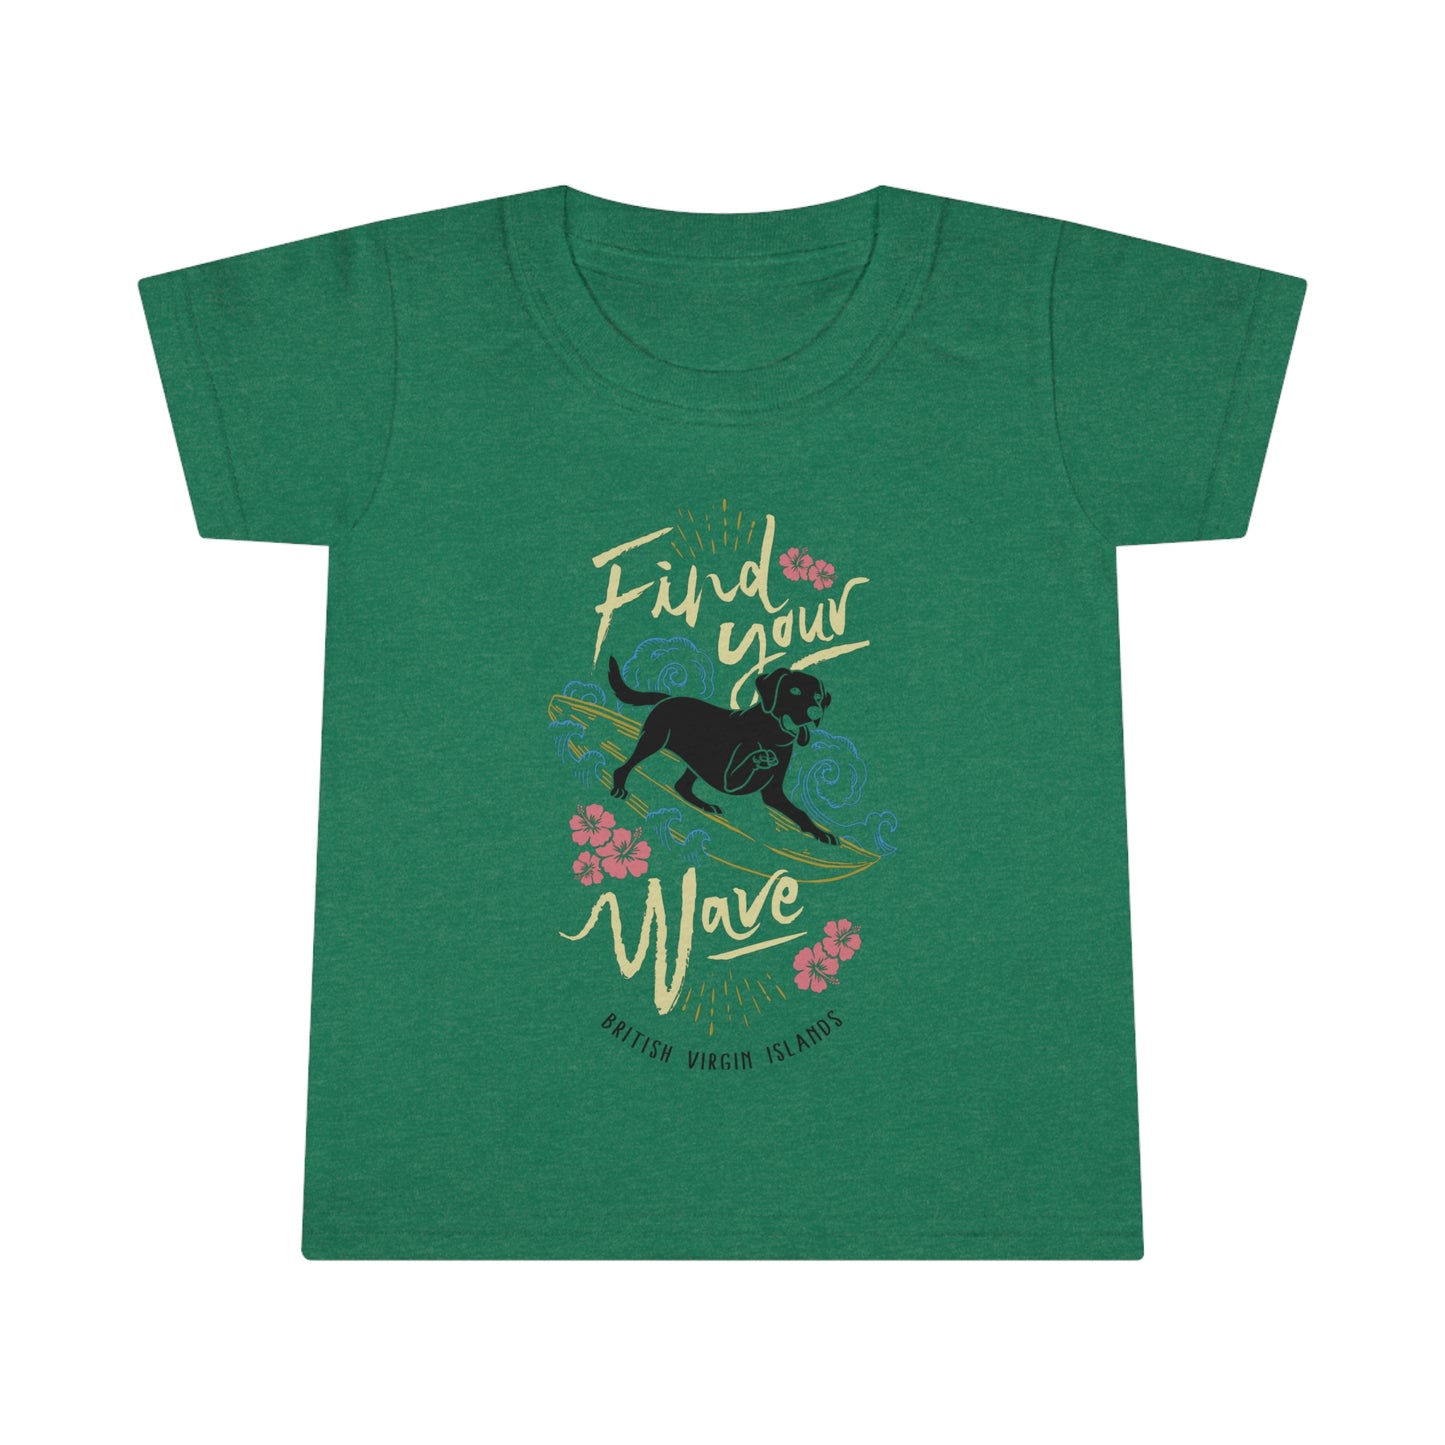 "Find Your Wave" Toddler T-shirt